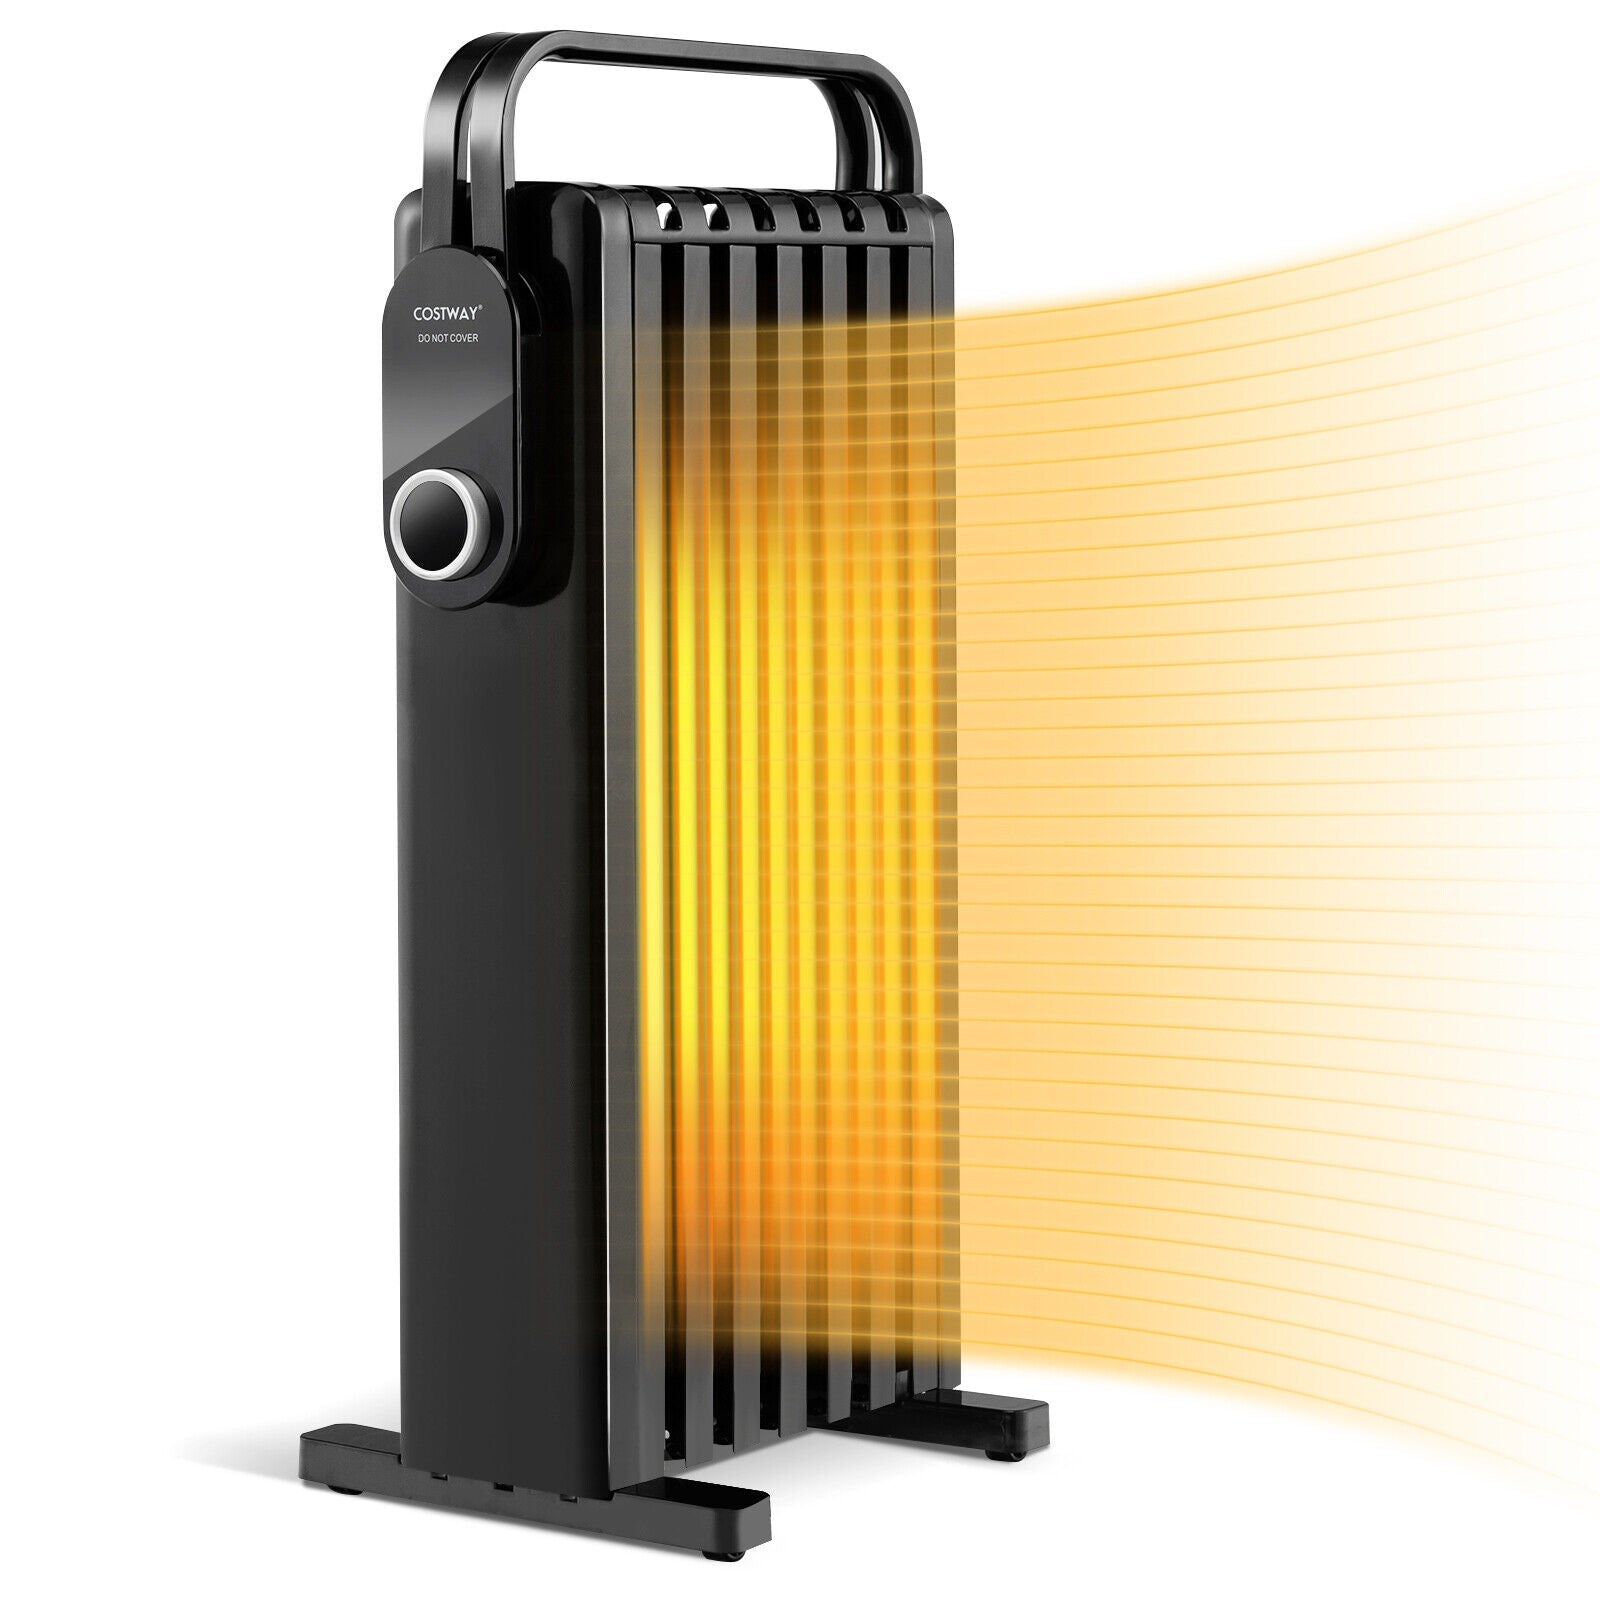 1500W Electric Space Heater Oil Filled Radiator Heater with Foldable Rack at Gallery Canada